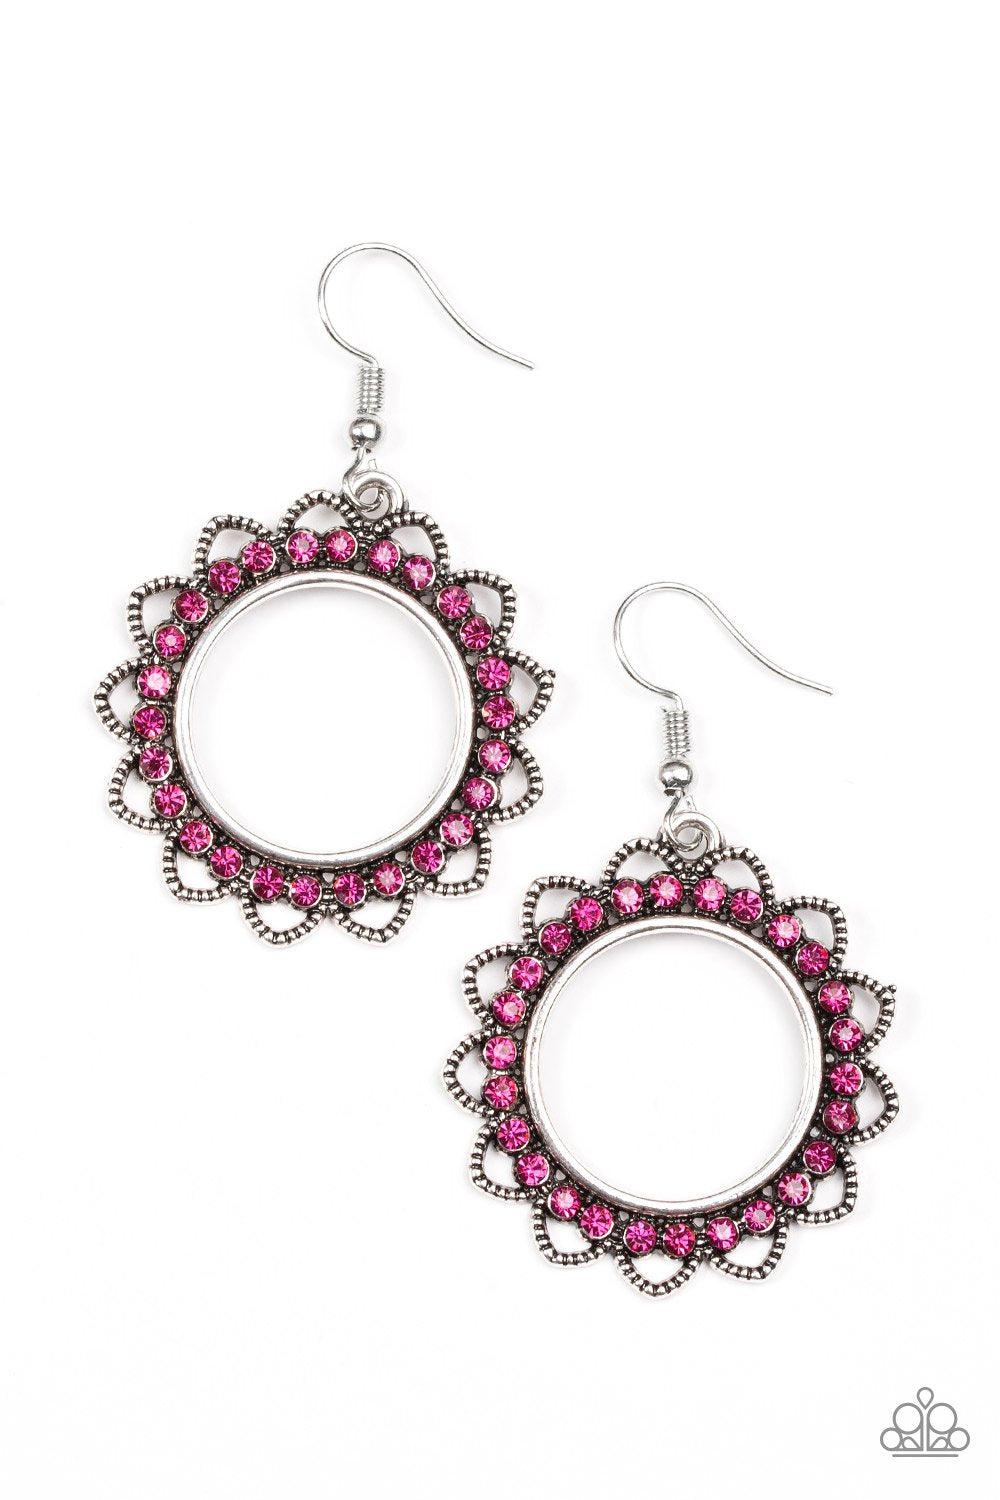 Bring Your Tambourine Pink Earrings - Paparazzi Accessories-CarasShop.com - $5 Jewelry by Cara Jewels